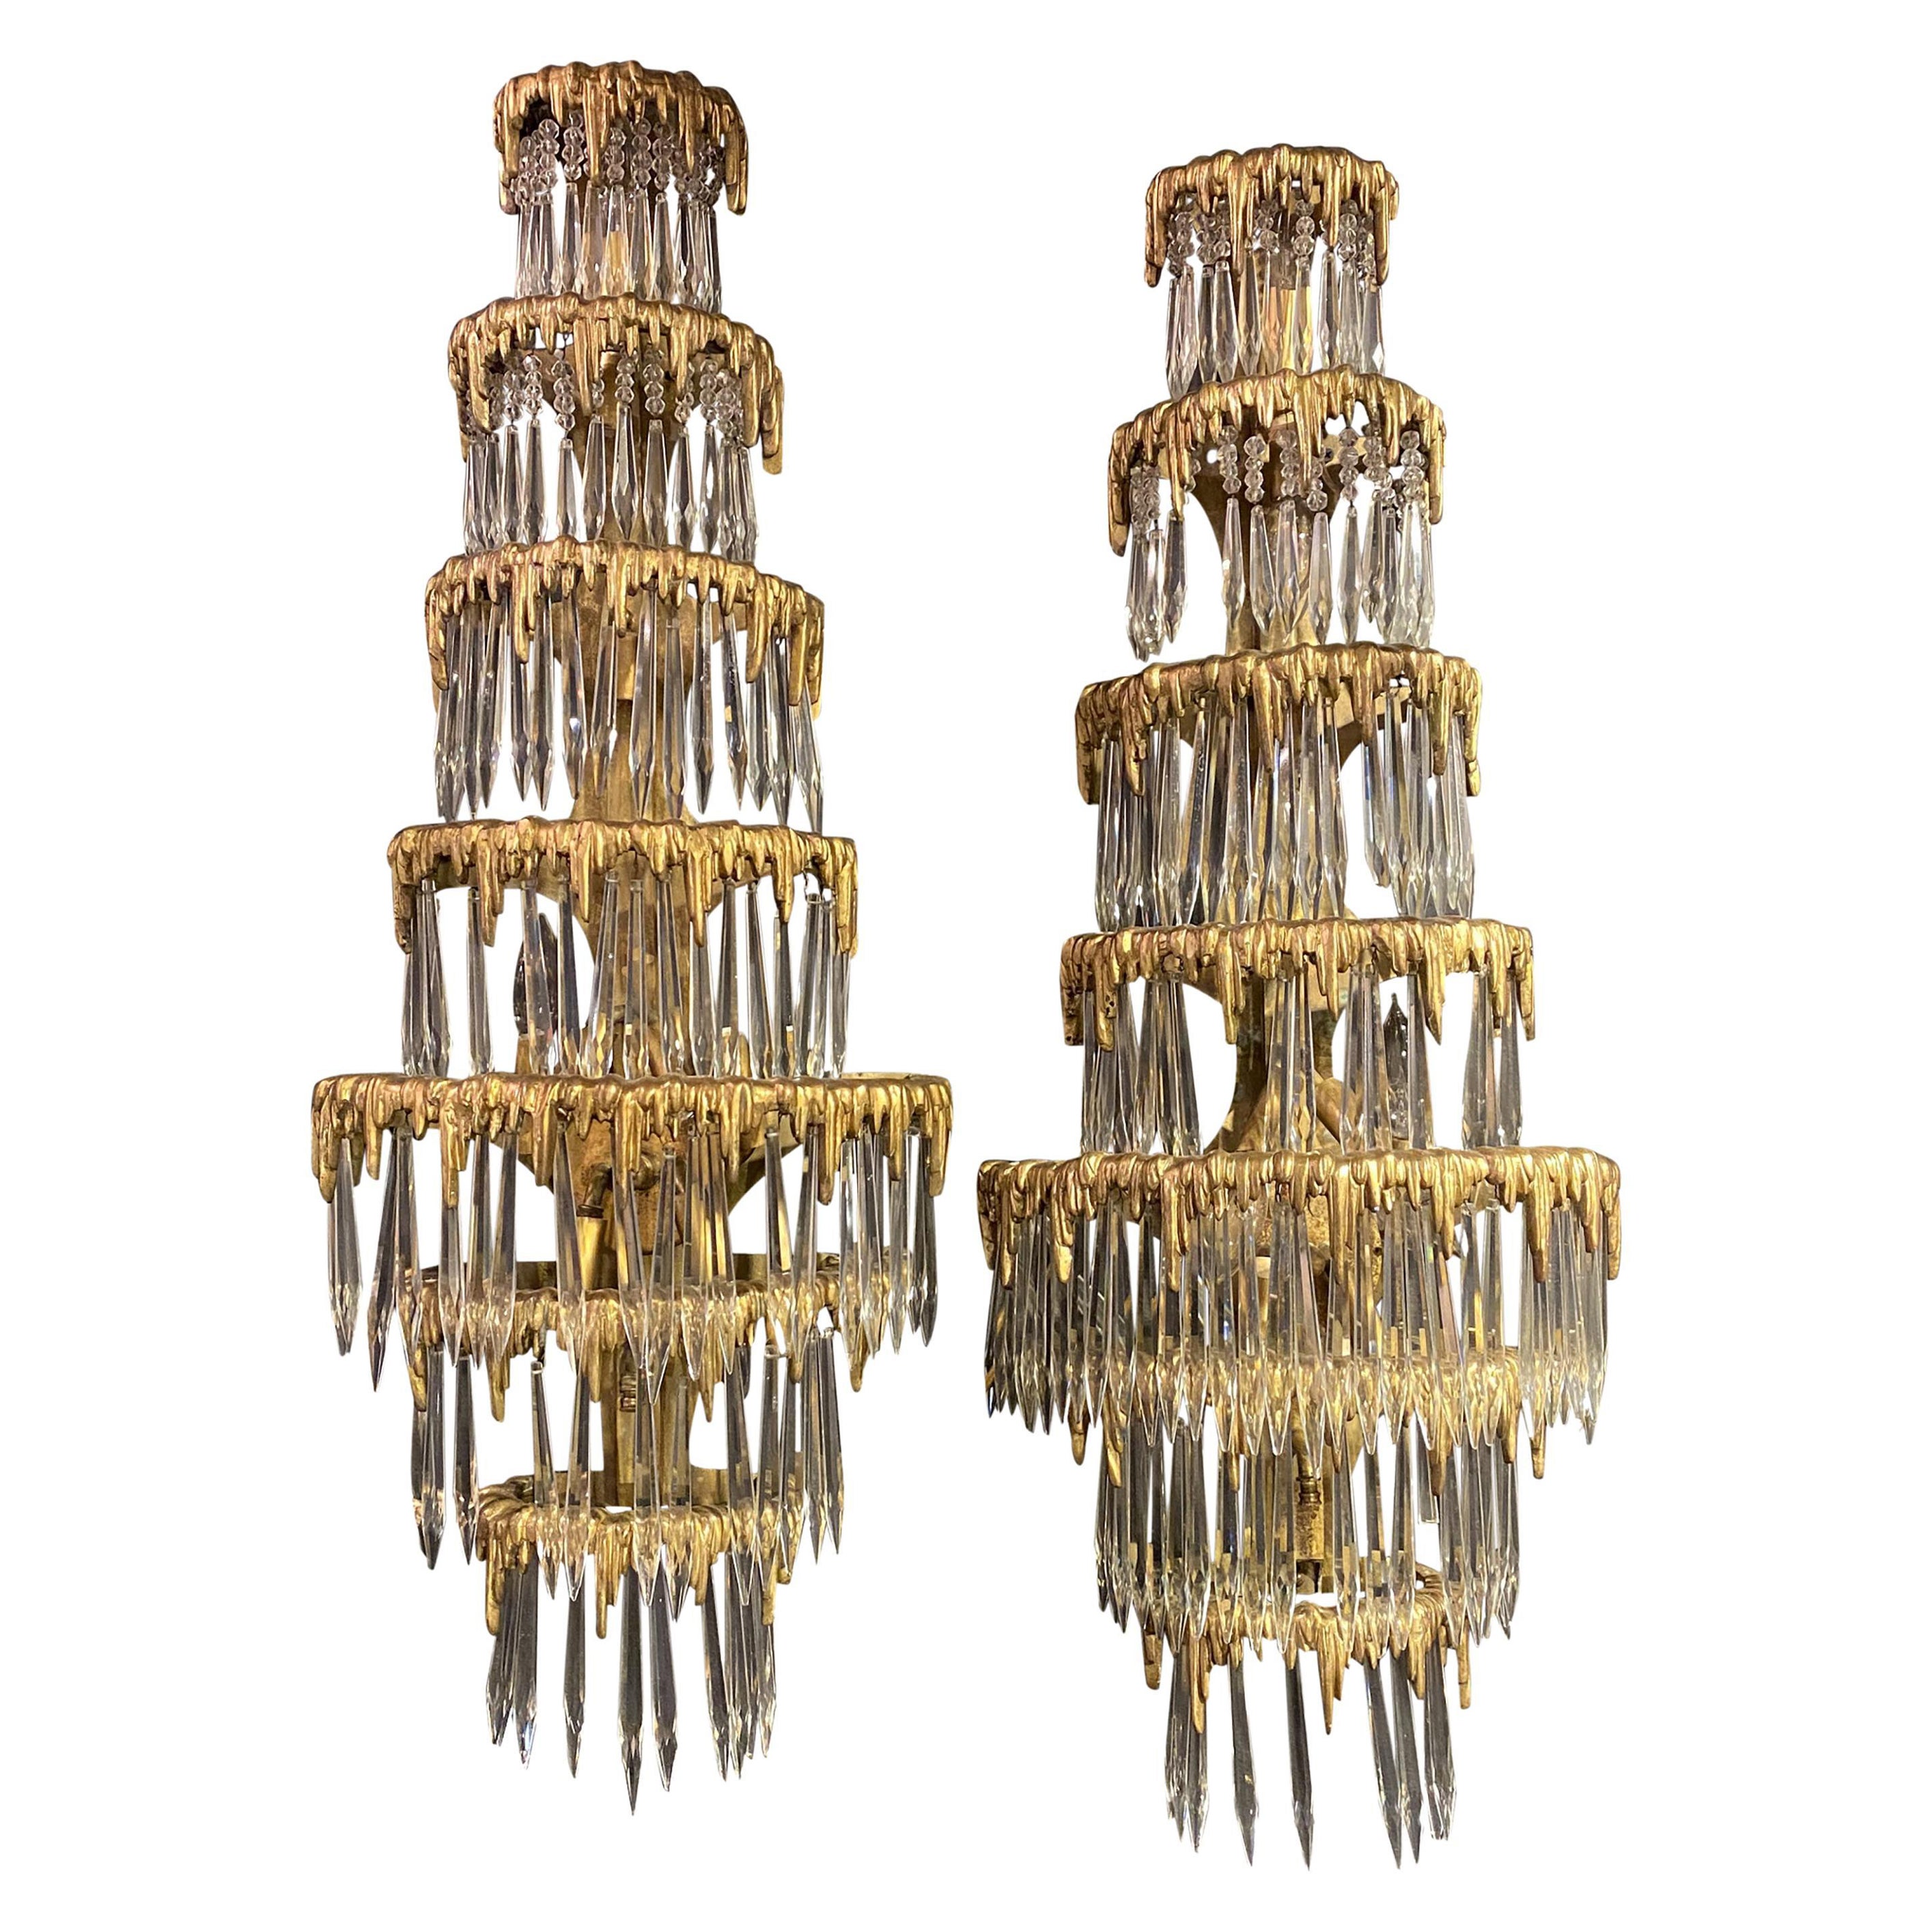 Pair of Caldwell Waterfall Sconces, Circa 1920s